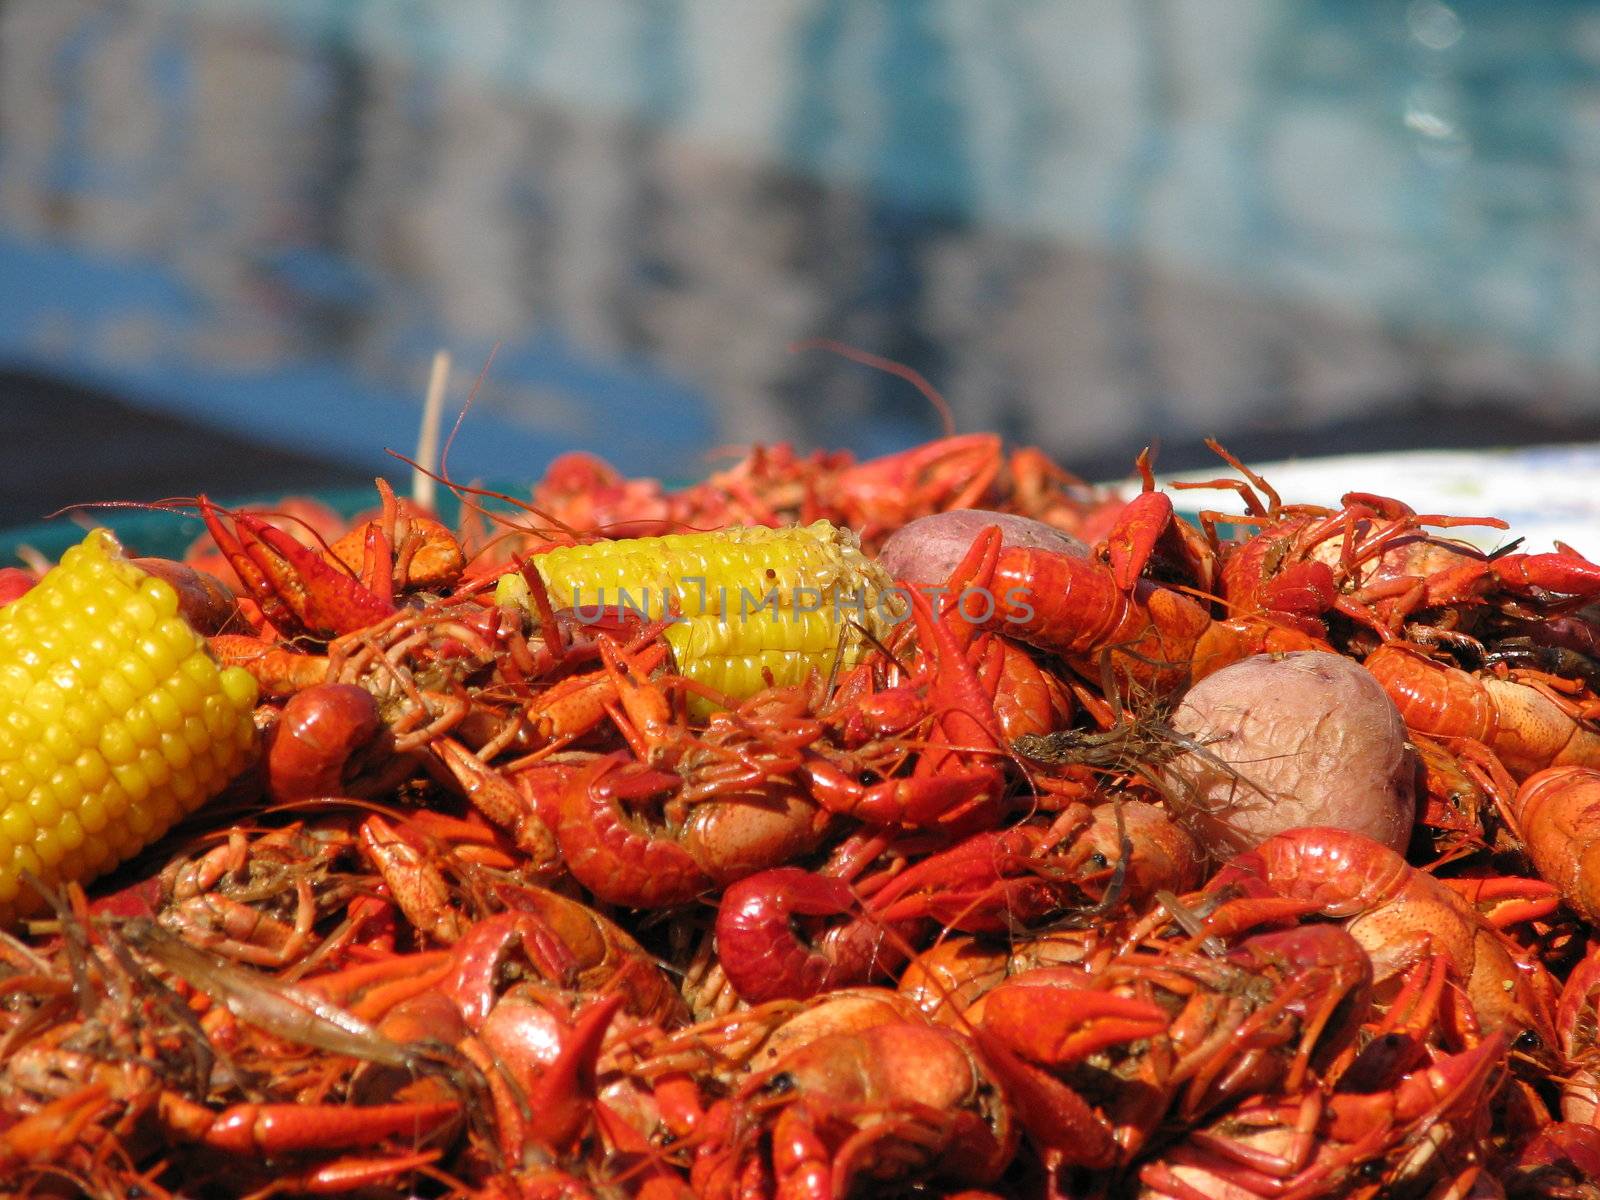 Crawfish with Blurred Pool in Background by bellafotosolo